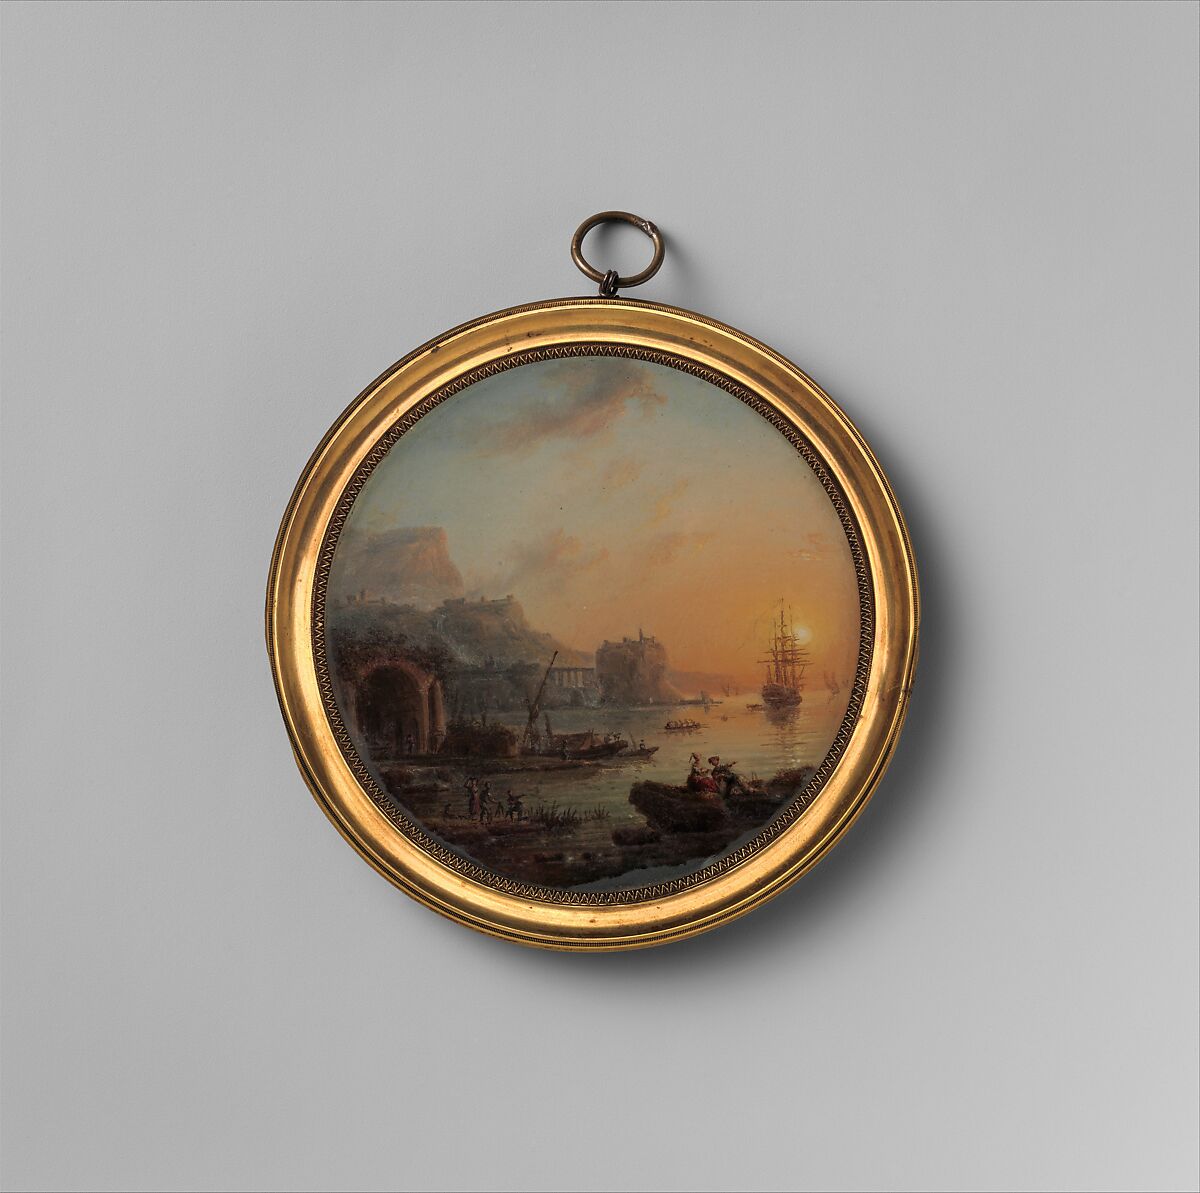 View of a Harbor, French Painter (ca. 1750), Verre fixé 